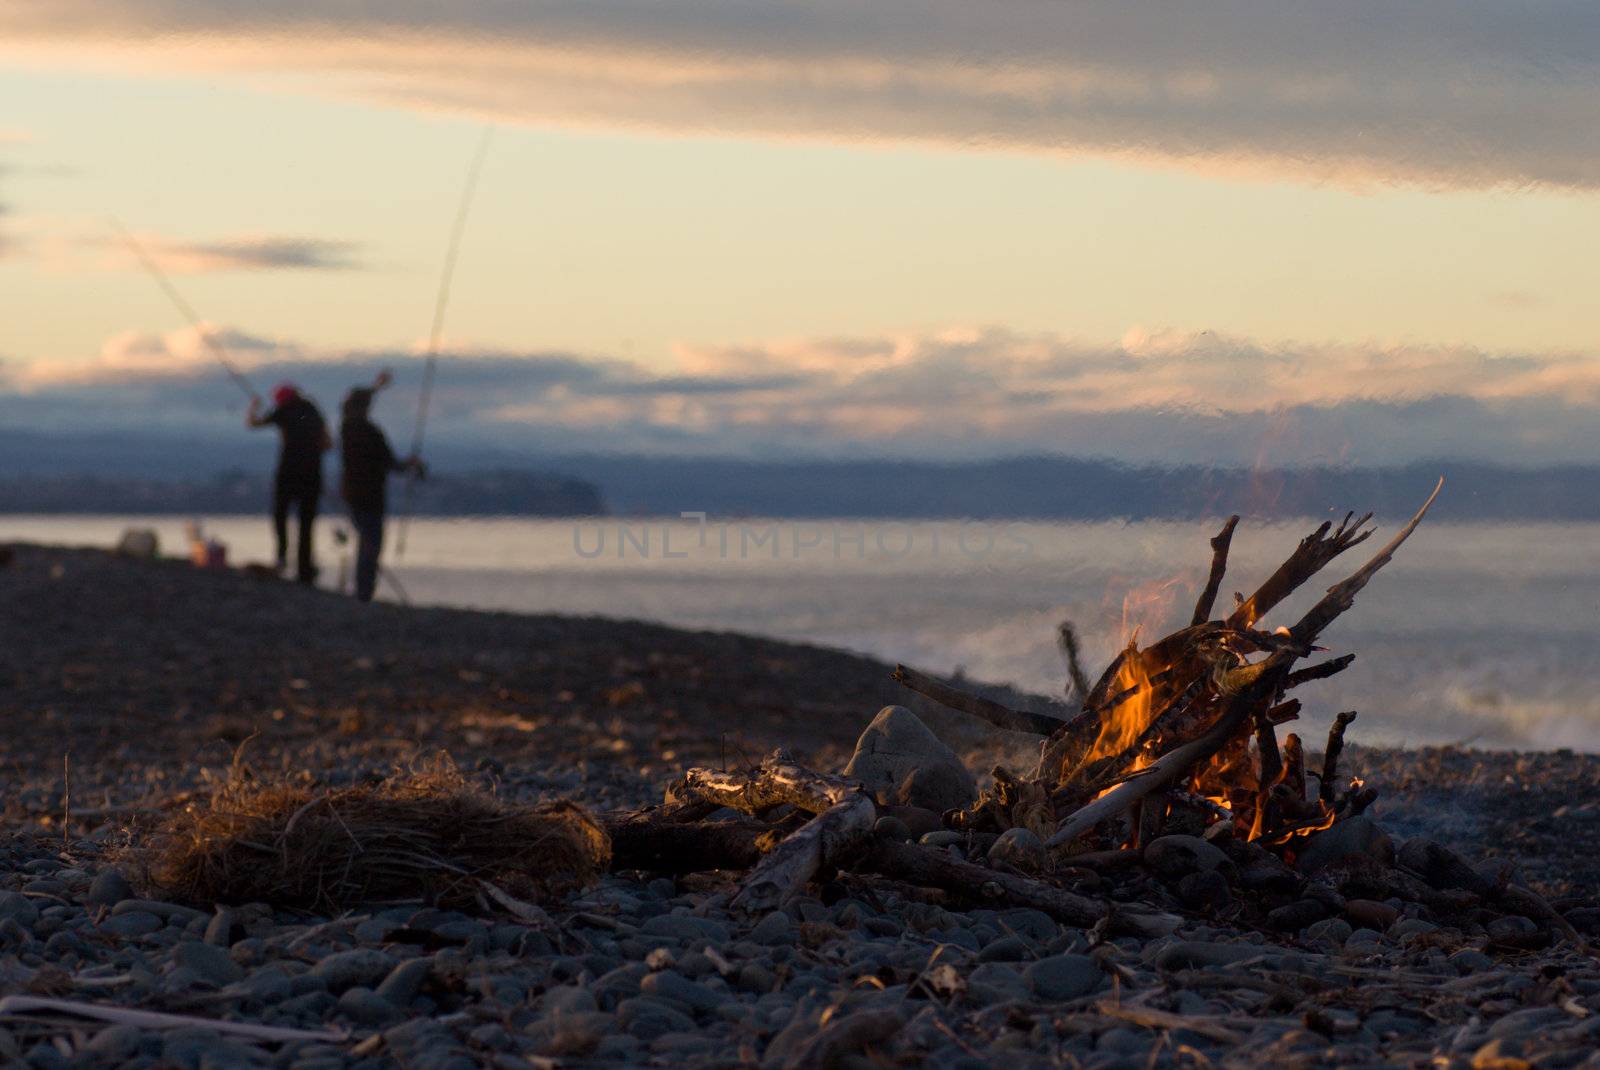 A warm fire on the beach and surfcasting on a cool winter afternoon. Haumoana Beach, Hawke's Bay, New Zealand